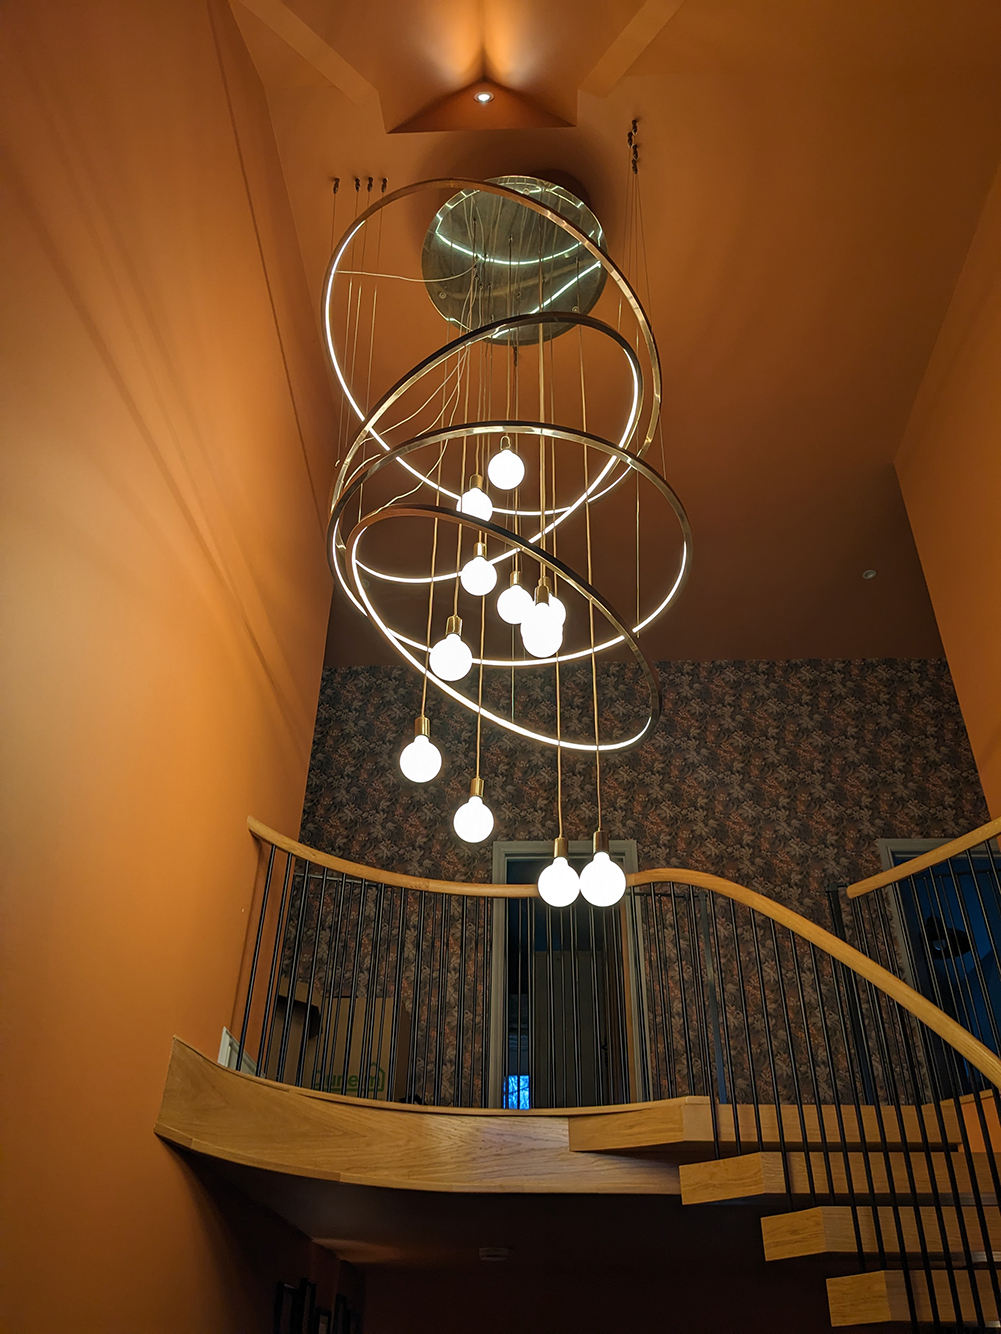 A photo of the finished and installed chandelier in the hallway, taken from below.